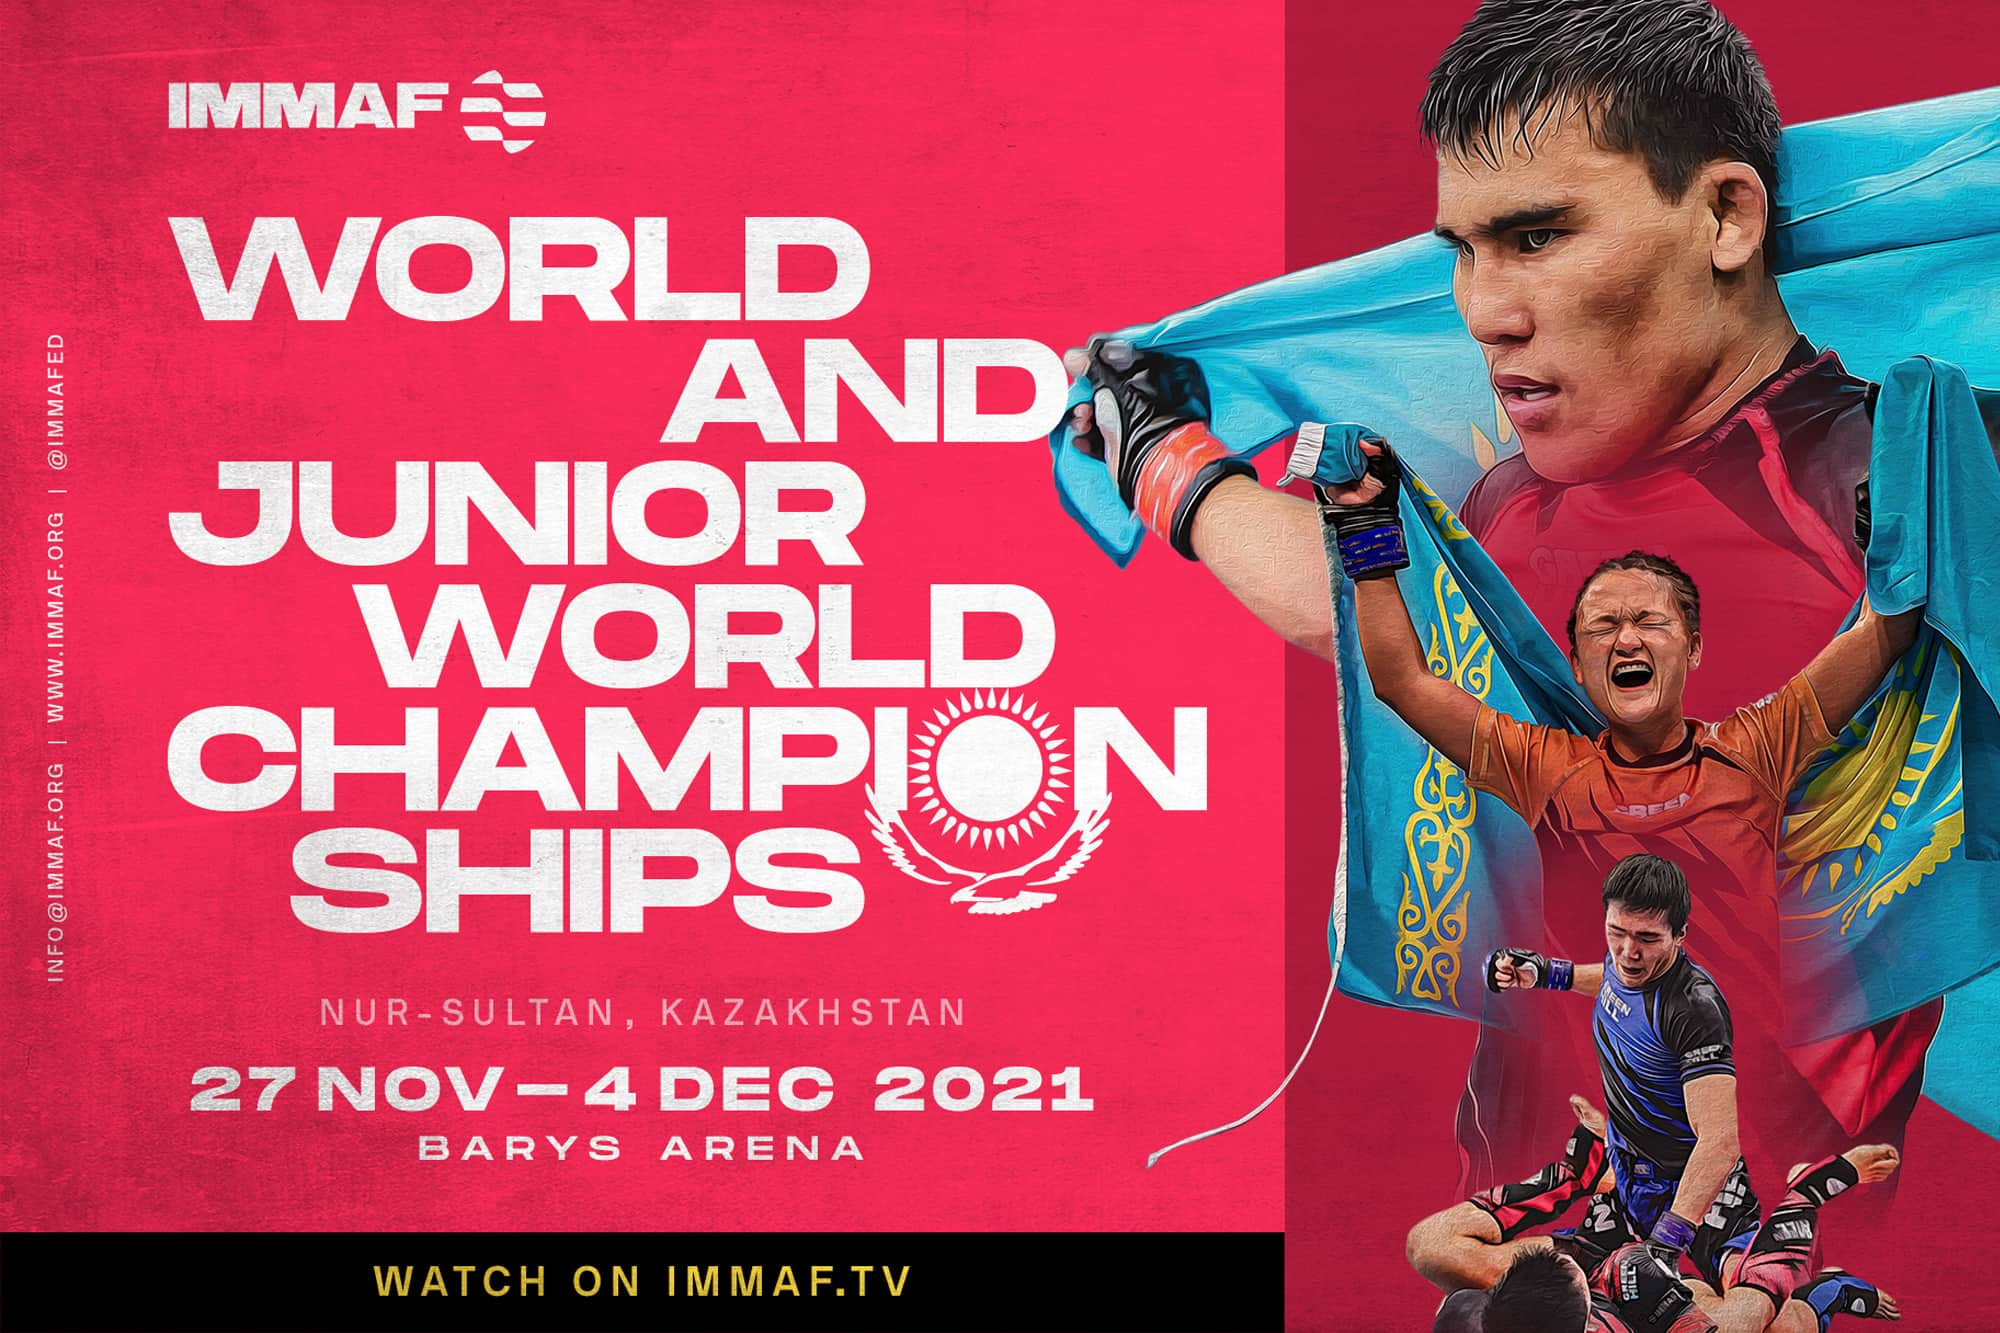 IMMAF cancels 2021 World Championships due to coronavirus situation in Kazakhstan